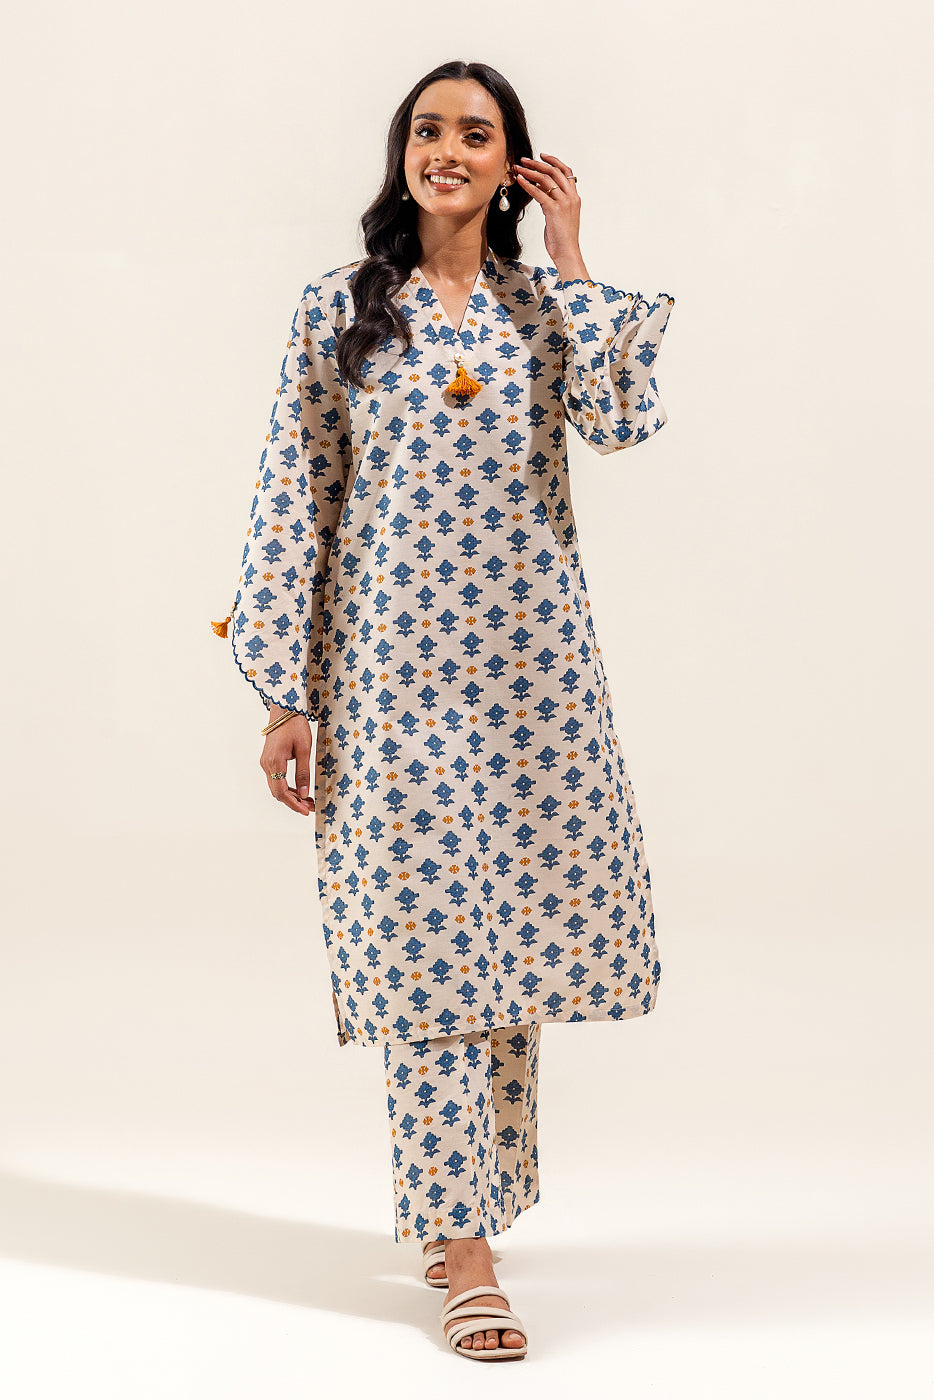 2 PIECE PRINTED SUIT-WHISPERING YALE (UNSTITCHED)